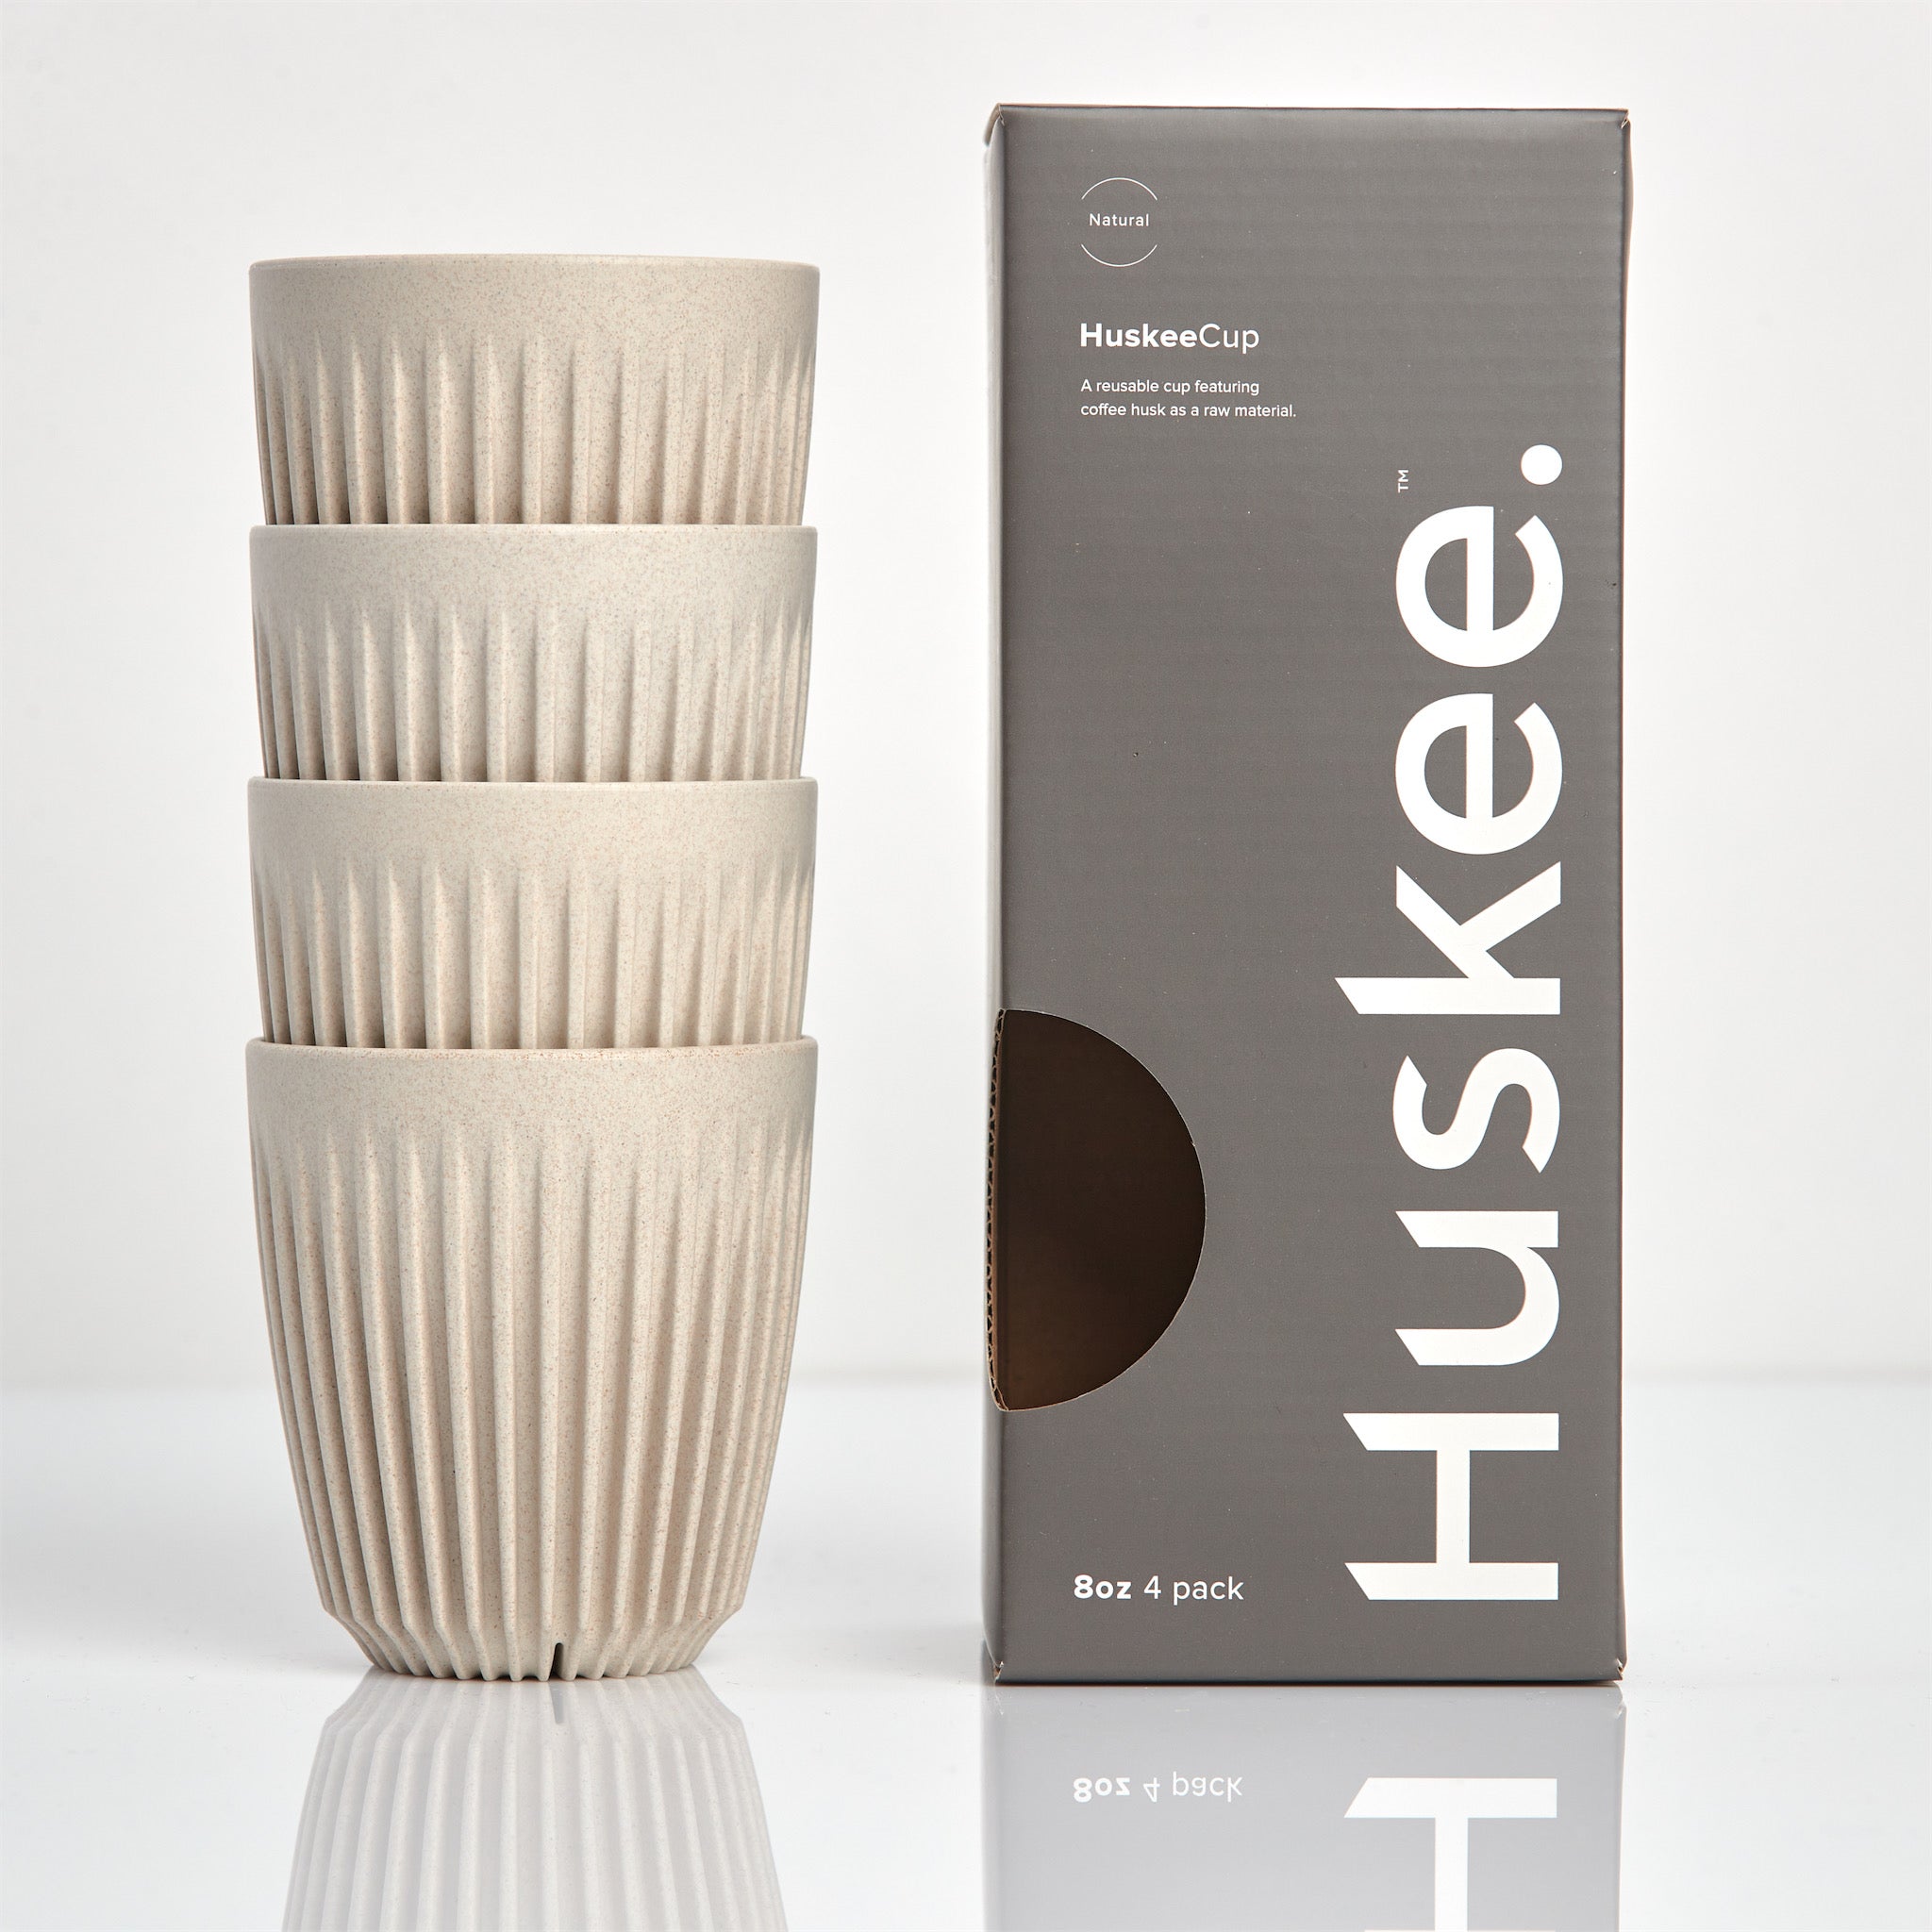 Huskee - Natural Cups 4 pack